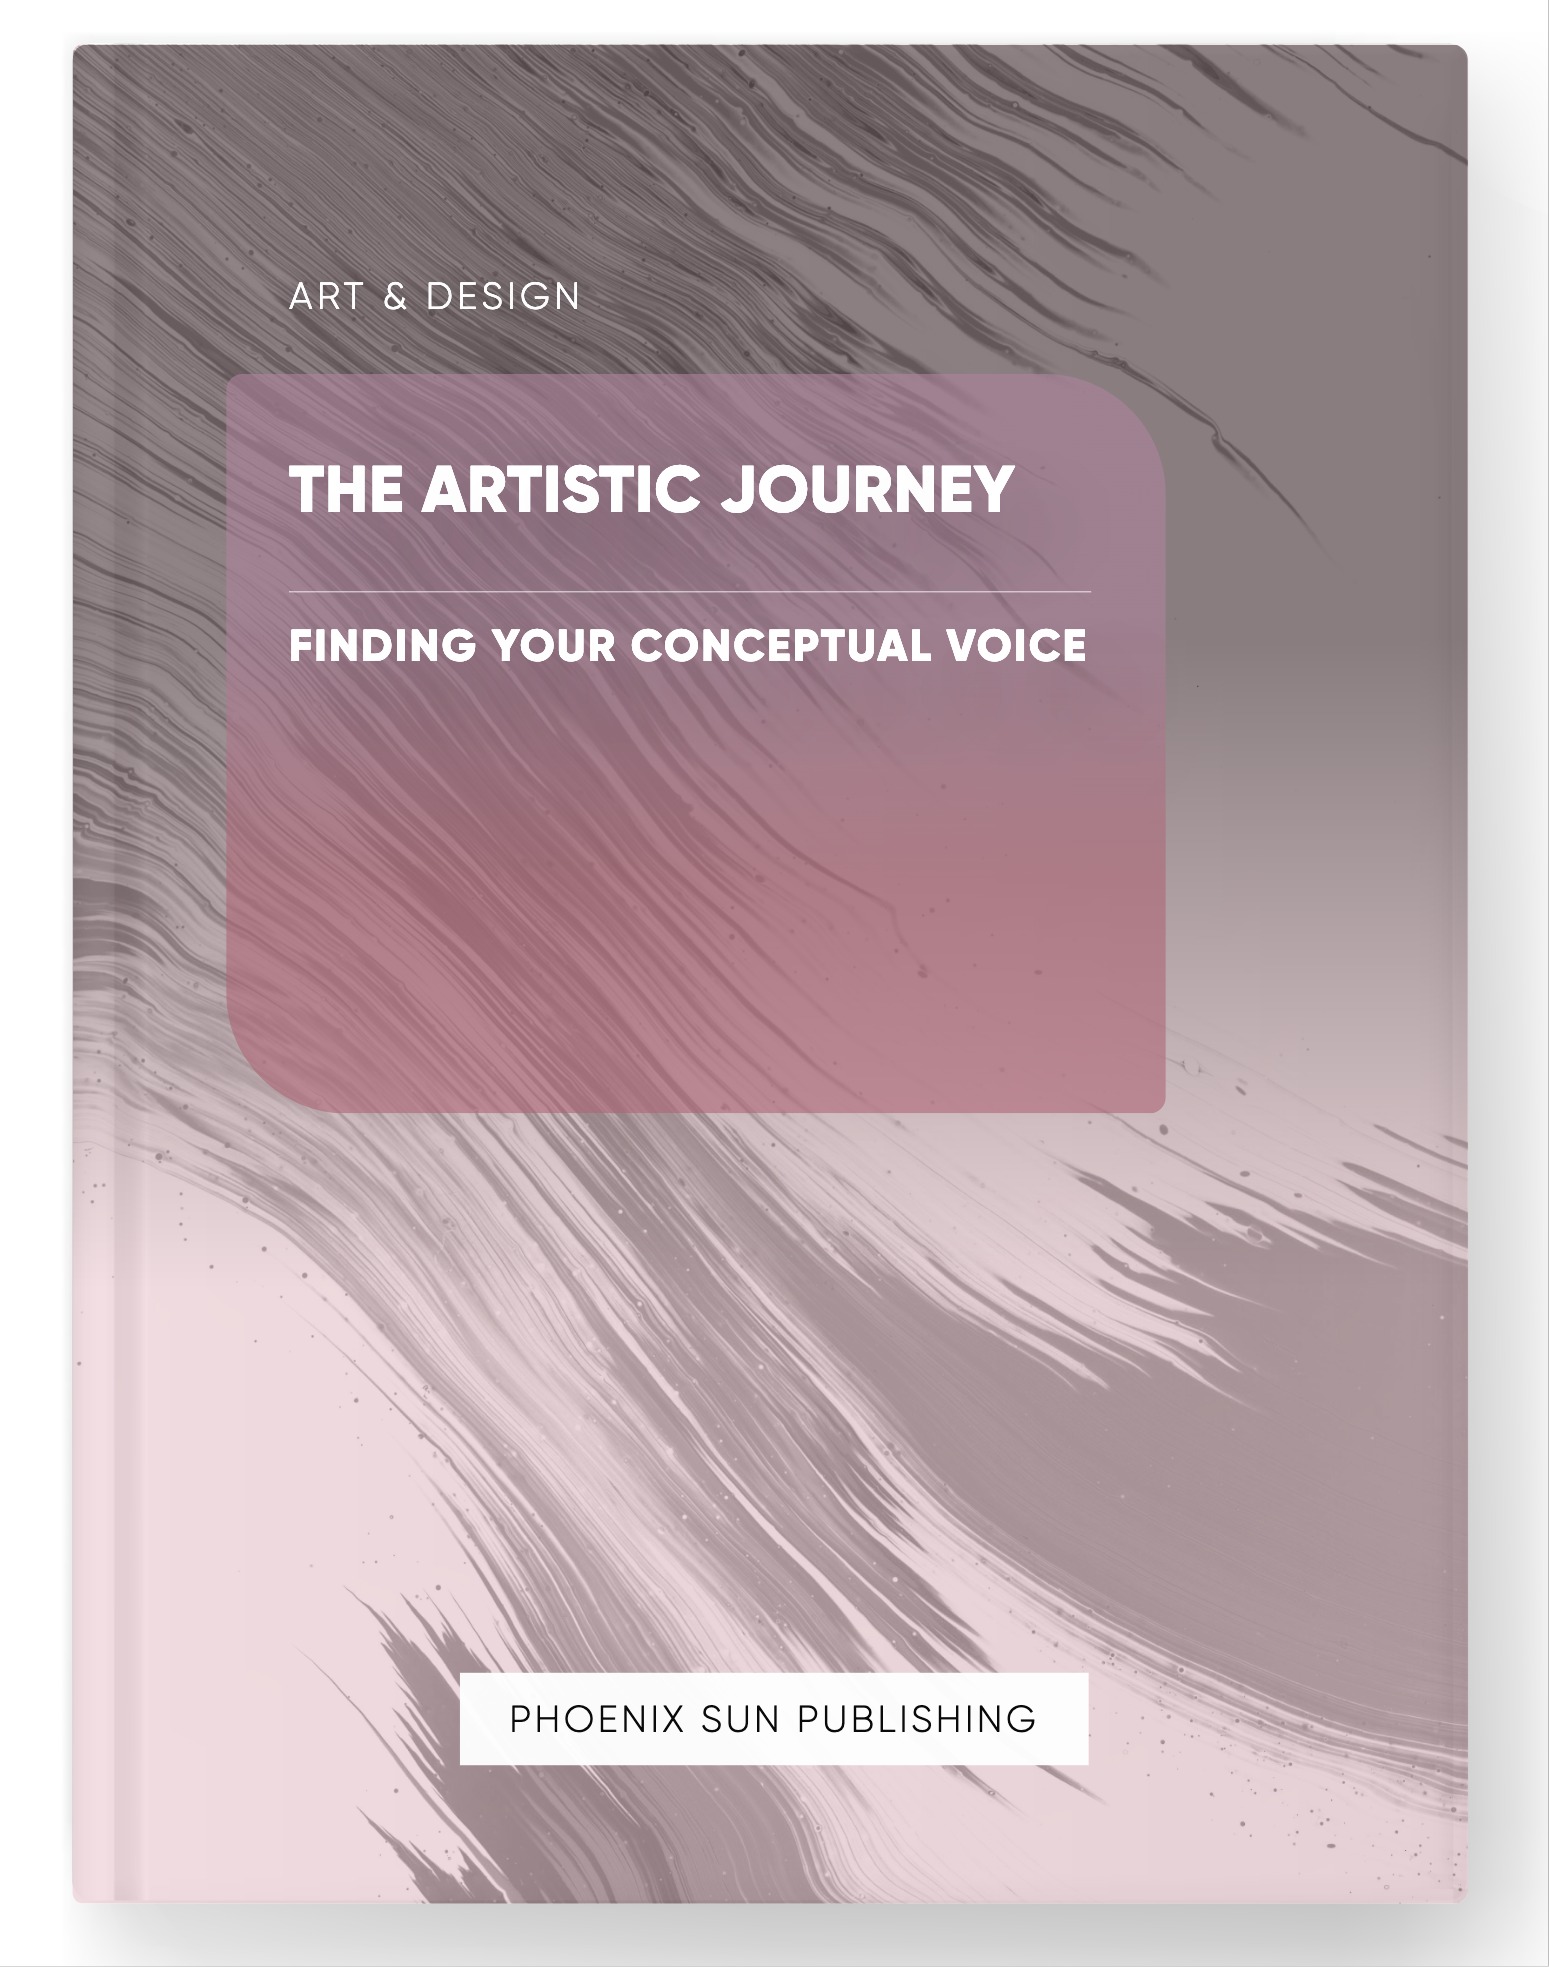 The Artistic Journey – Finding Your Conceptual Voice